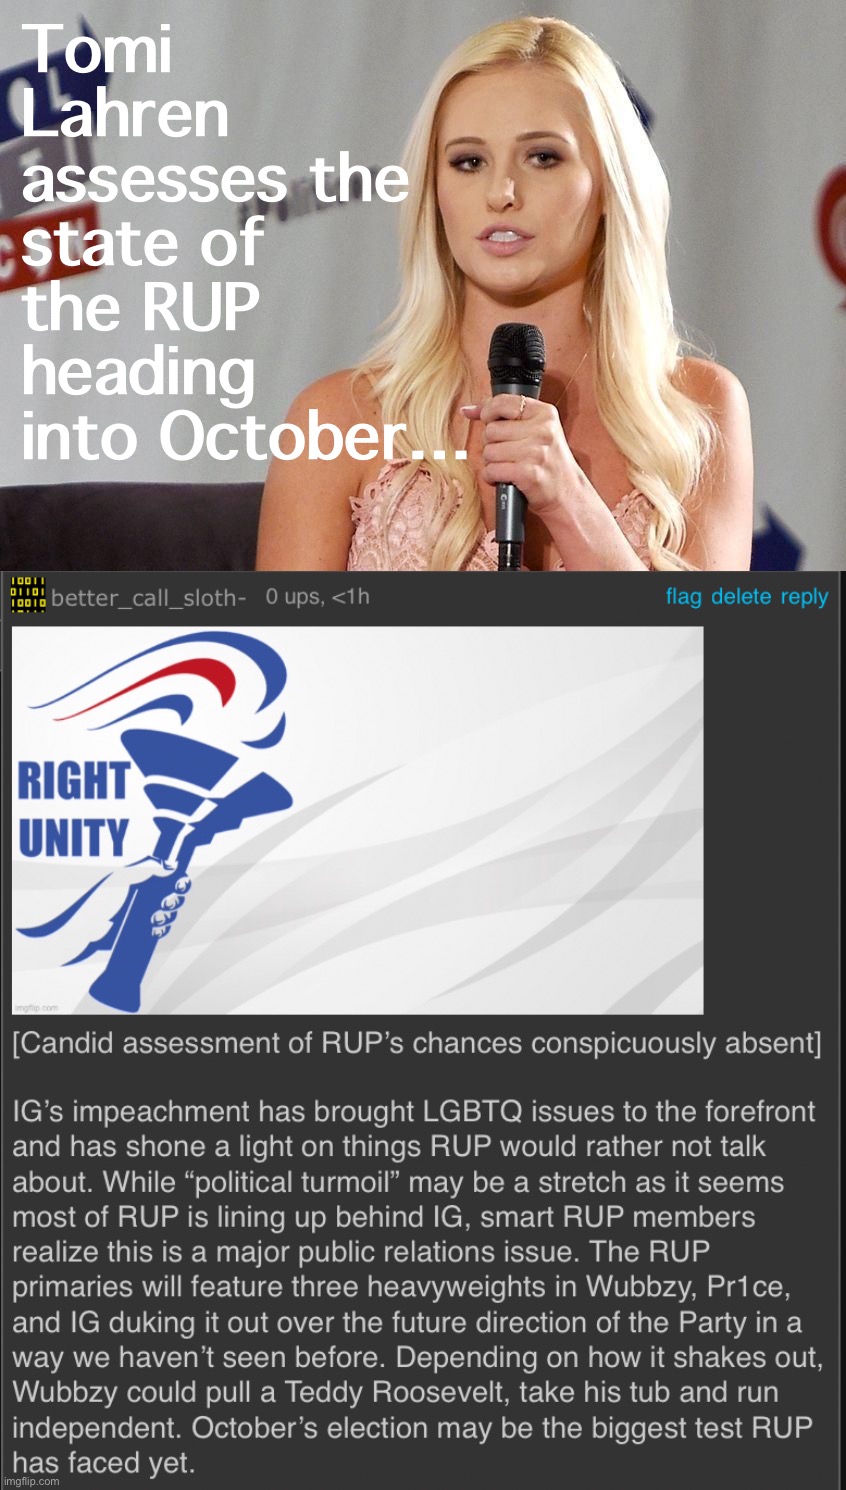 F1Fan didn’t assess RUP’s chances in the October horserace, so Tomi Lahren will. :) | Tomi Lahren assesses the state of the RUP heading into October… | image tagged in smart blonde,rup,right unity party,lgbtq,october,election | made w/ Imgflip meme maker